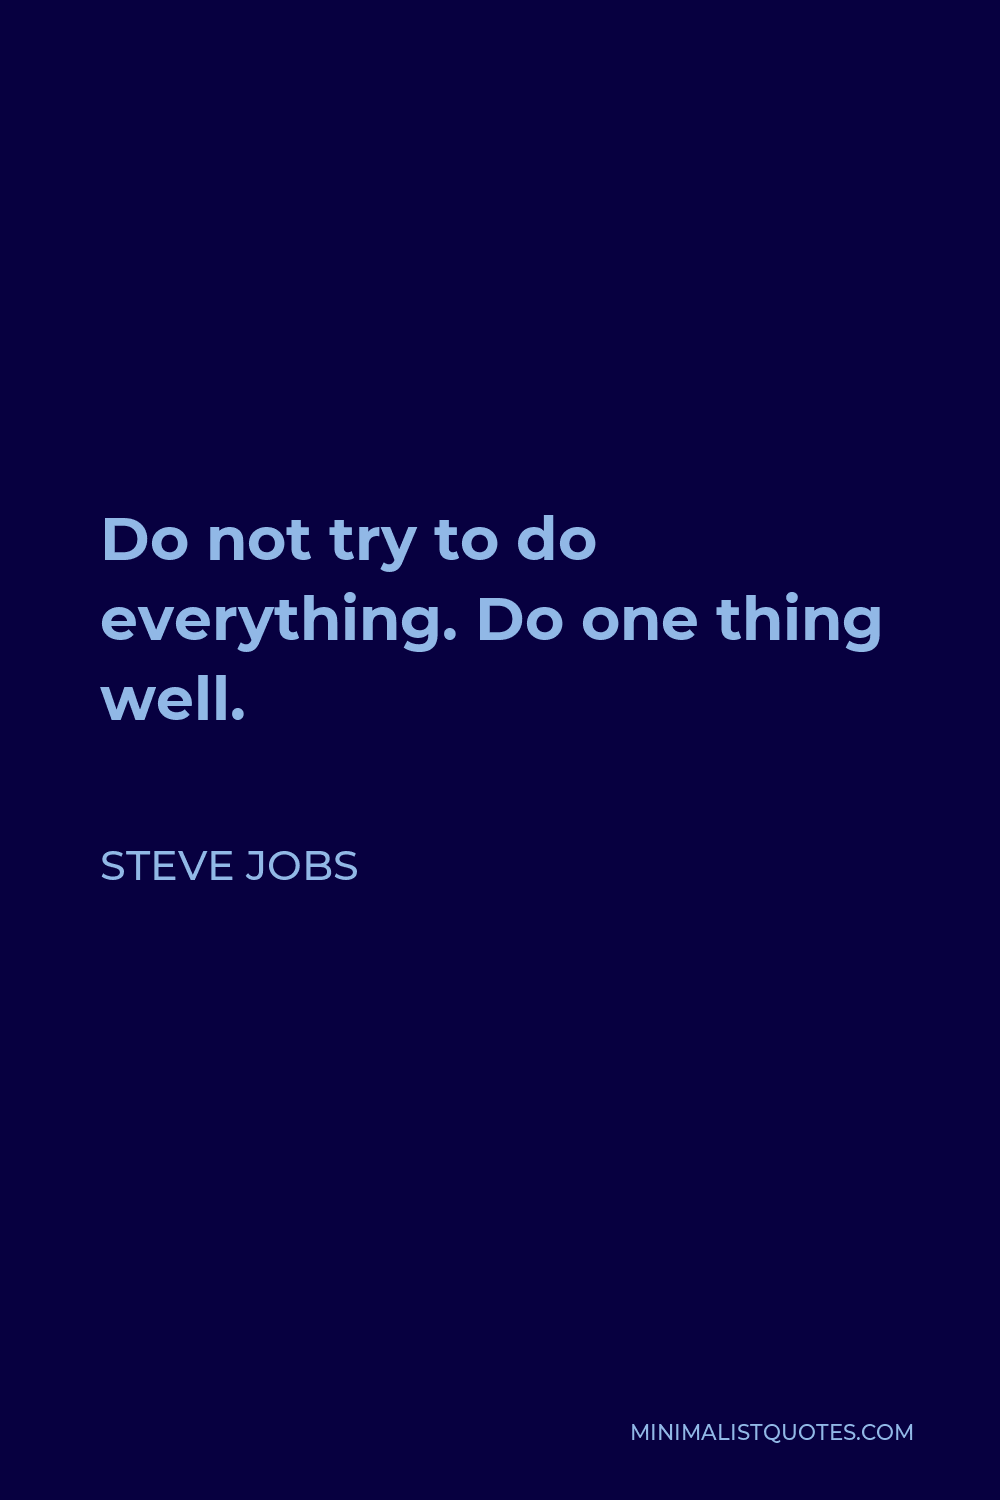 Steve Jobs Quote - Do not try to do everything. Do one thing well.